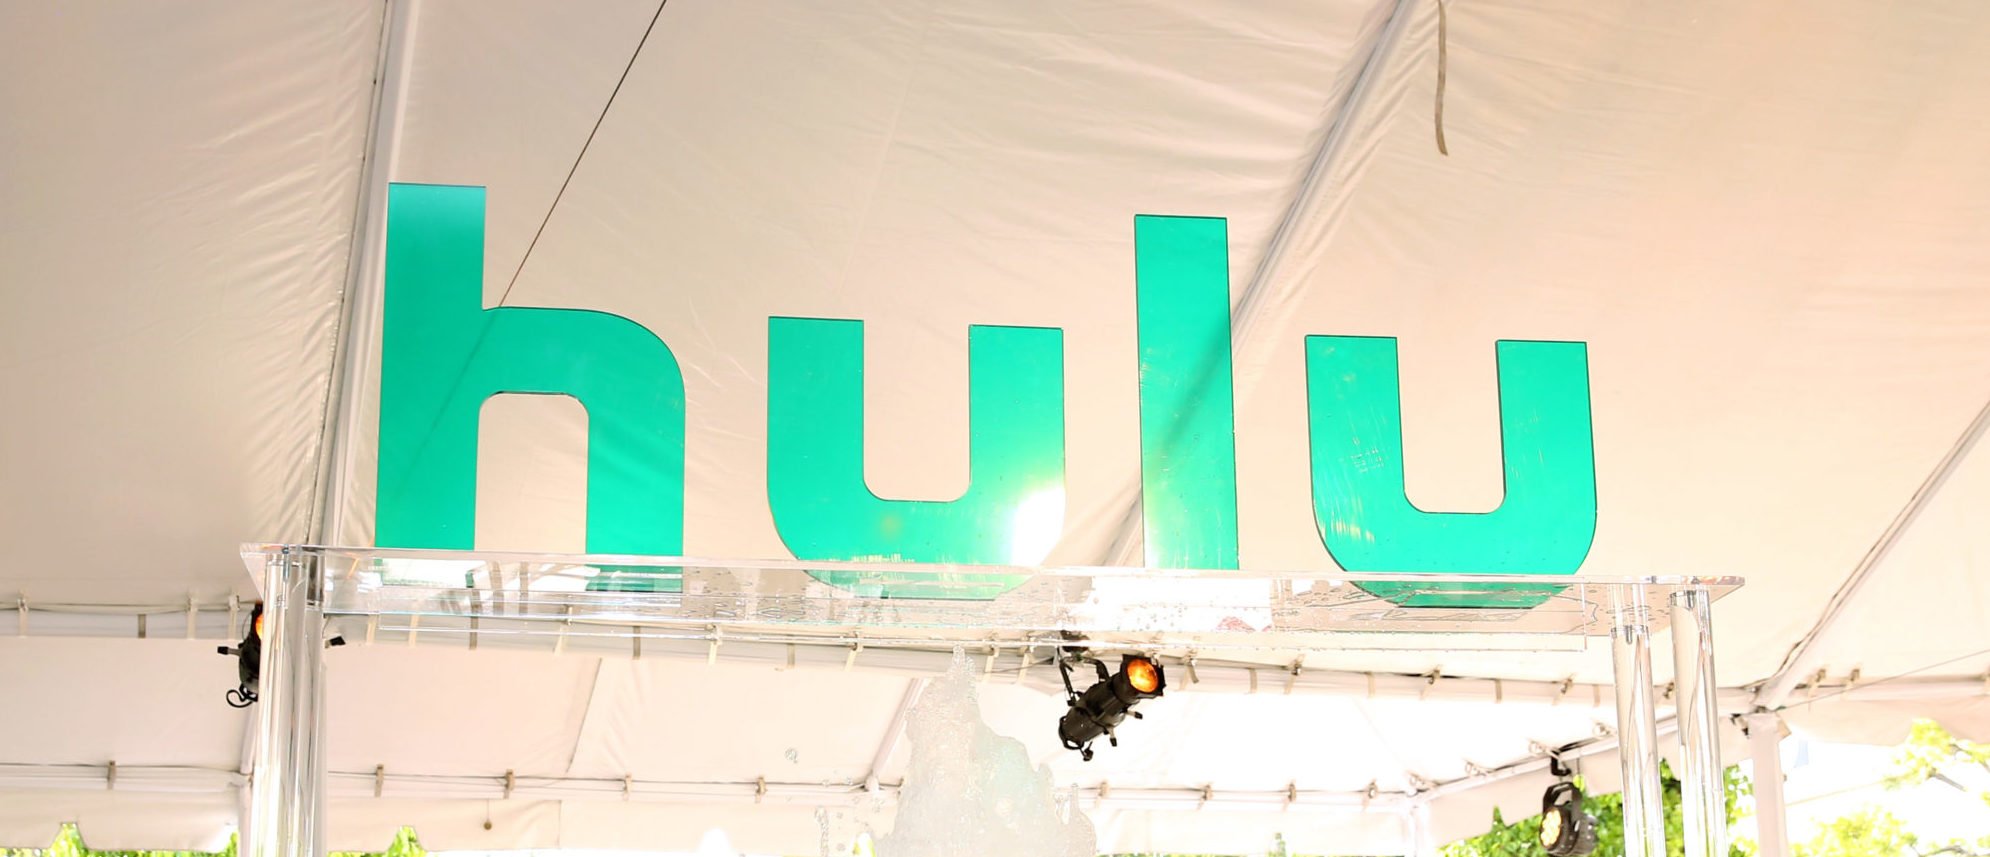 Hulu Backs Down, Agrees To Run Political Ads After Democrats Complain